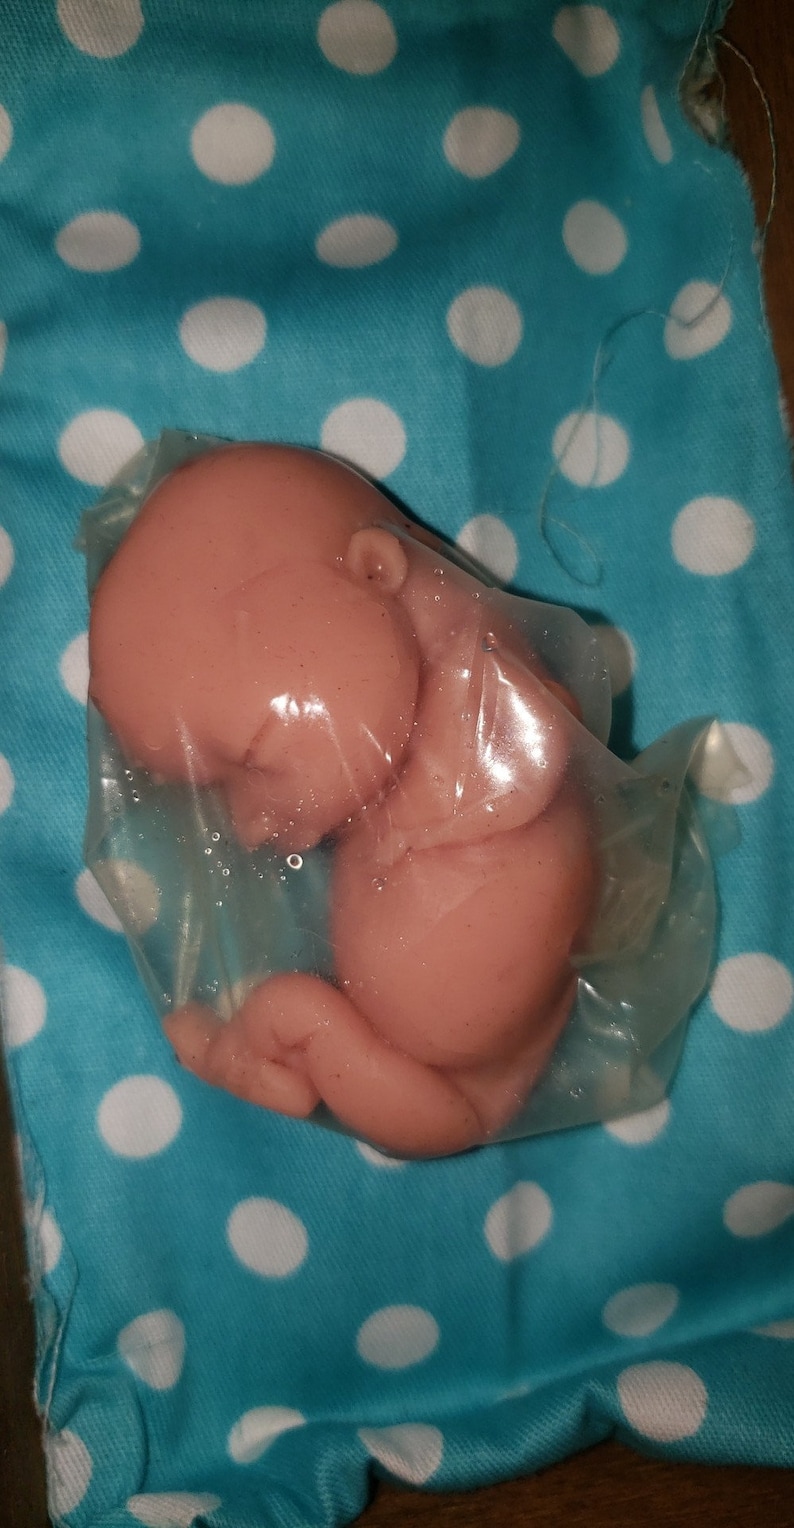 silicone baby fetus memorial baby fetus inside WOMB image 9